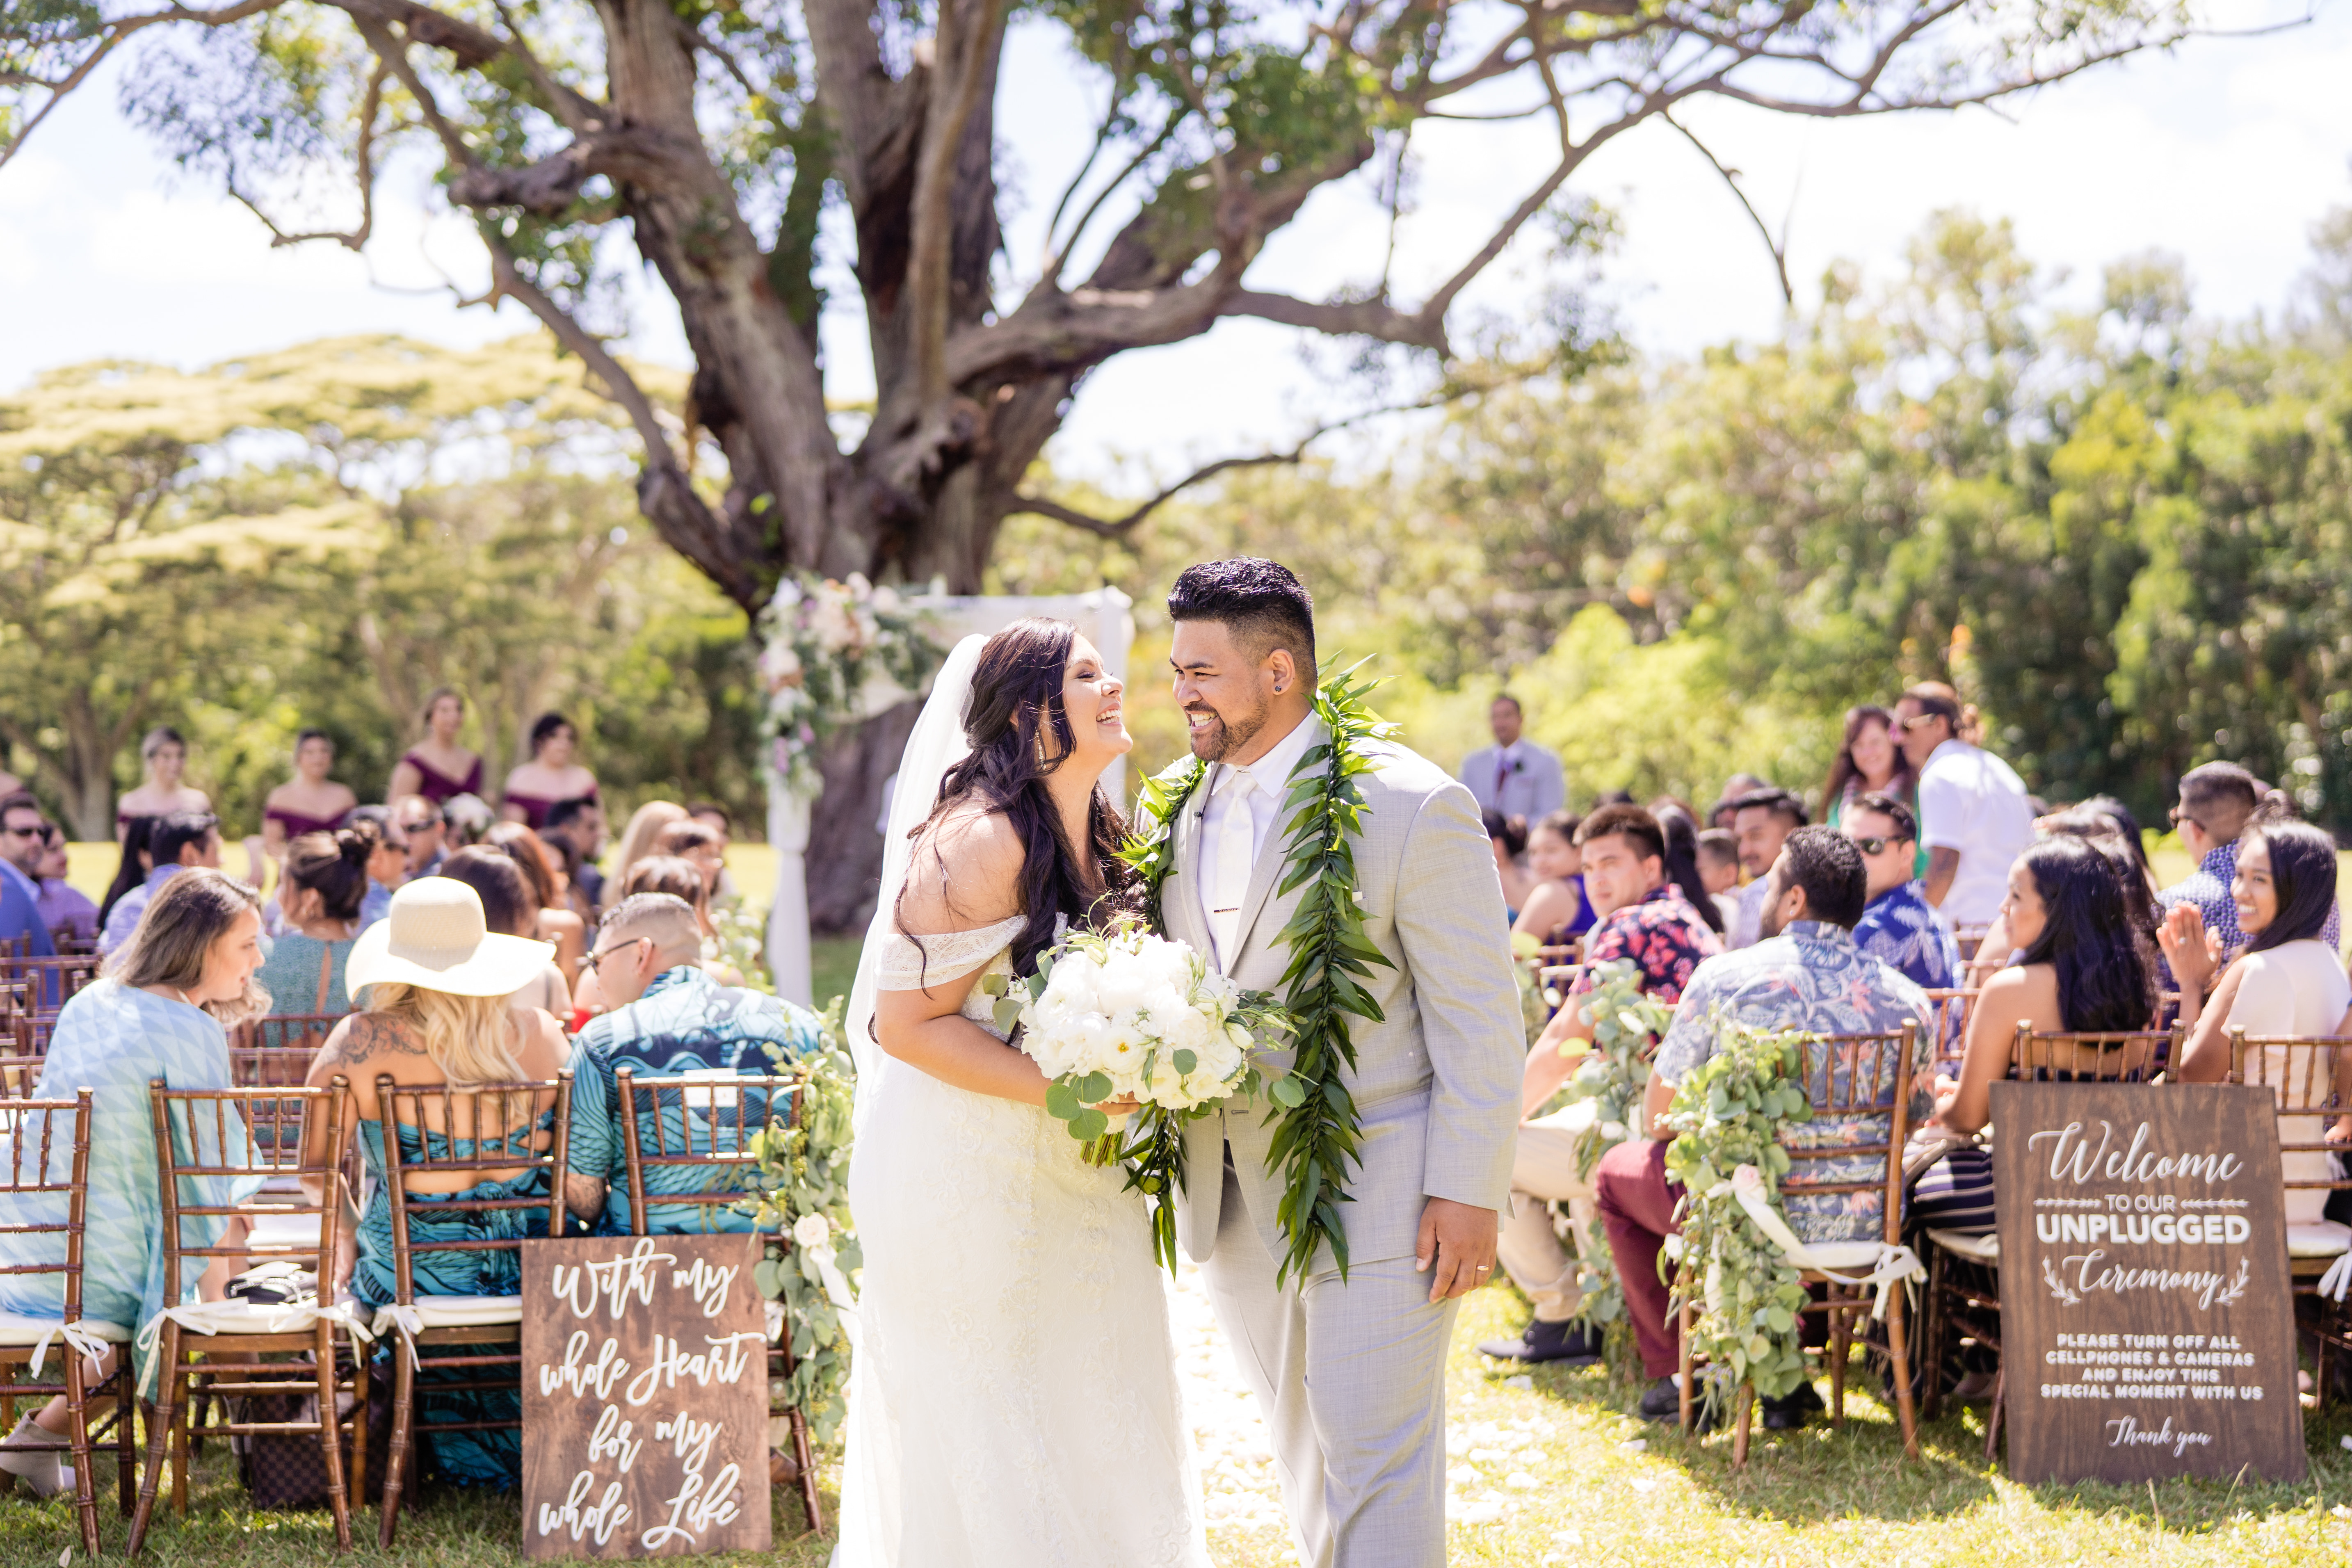 Bride and Groom on their wedding day at Sunset Ranch Oahu